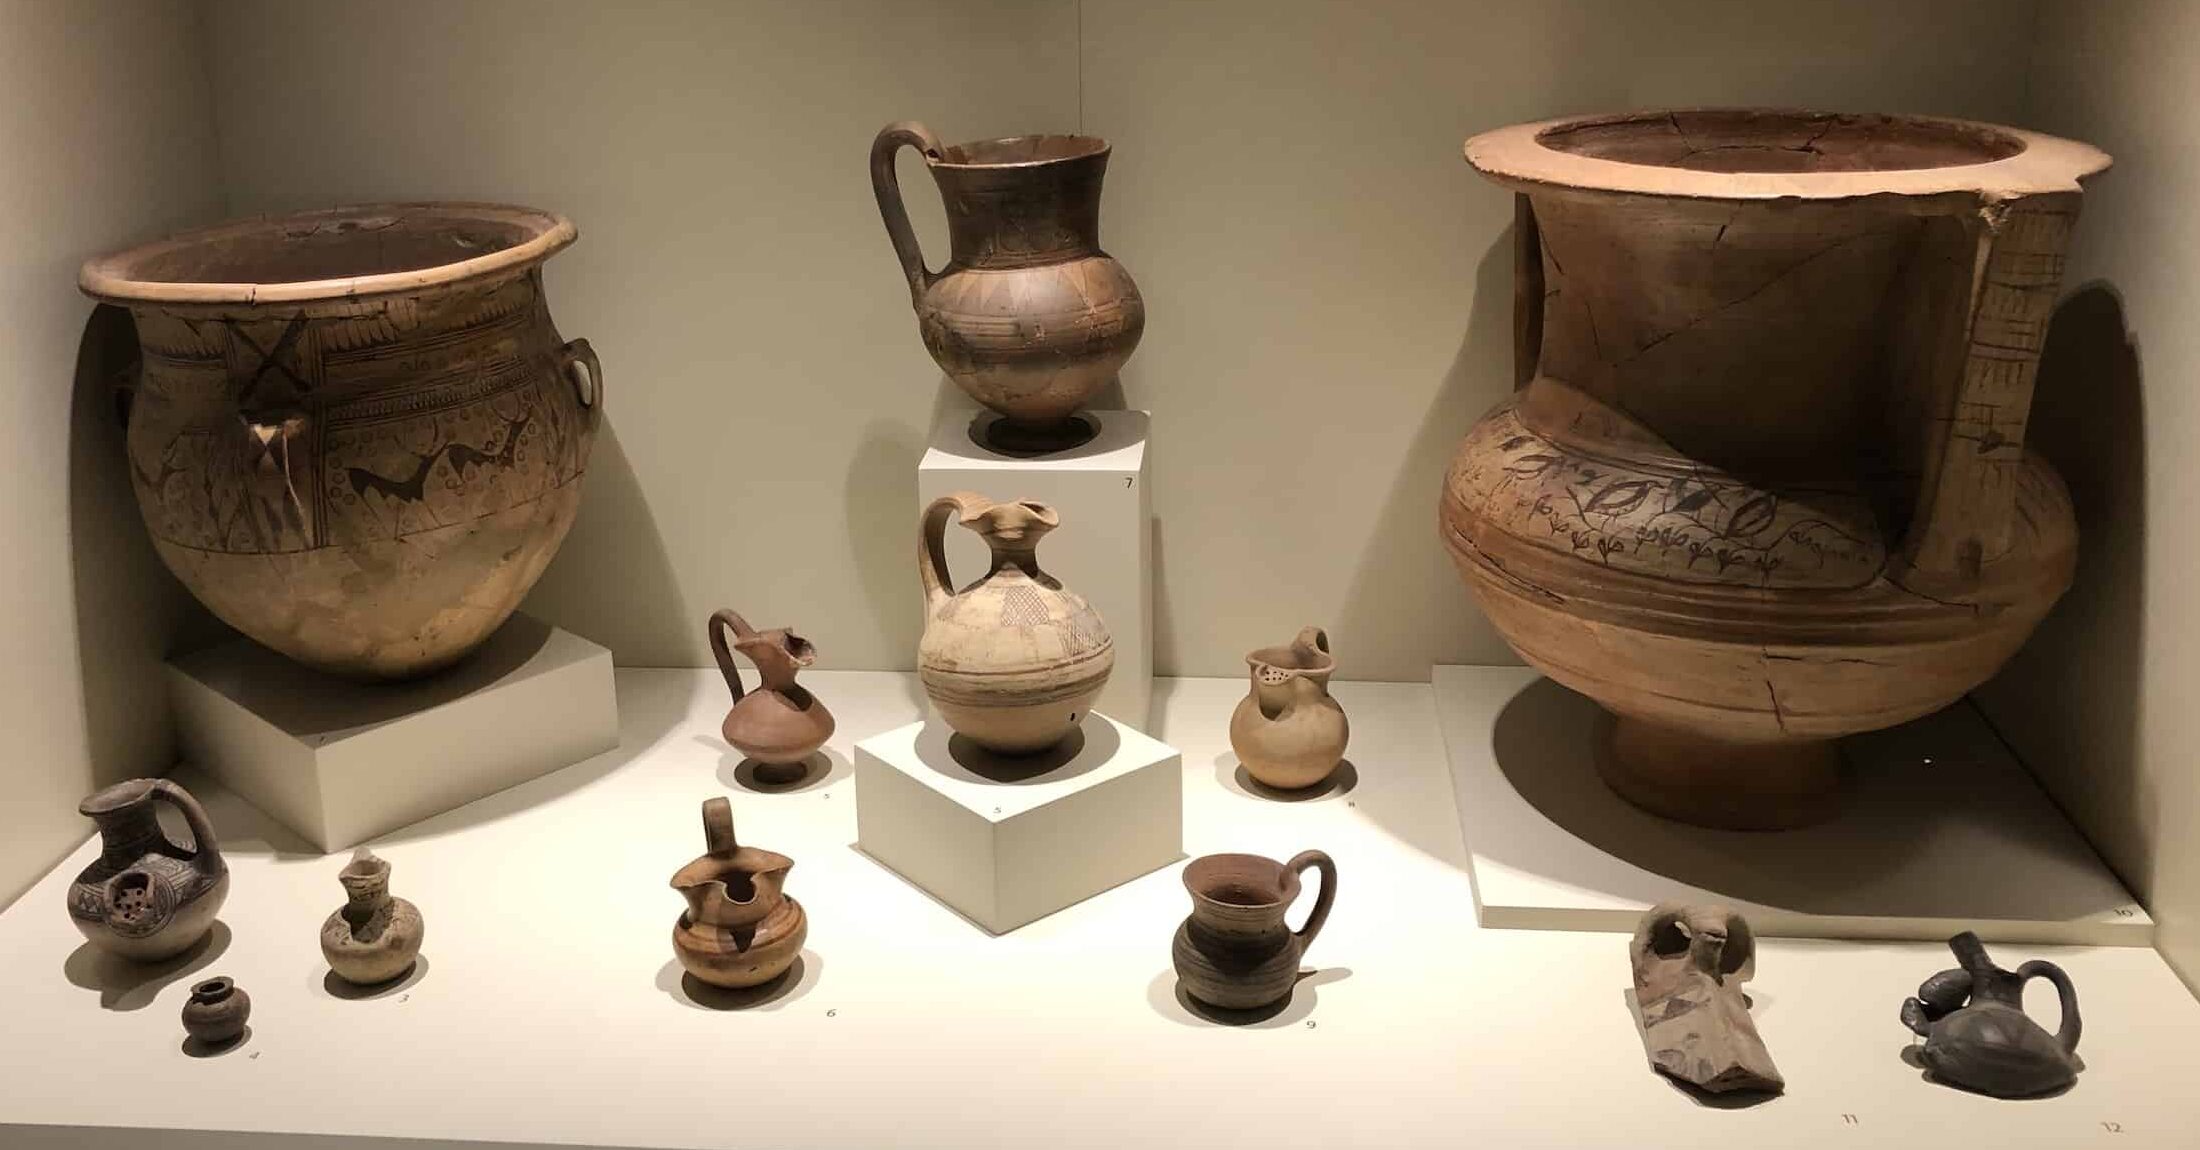 Ceramics from the Phrygian period at the Museum of Anatolian Civilizations in Ankara, Turkey